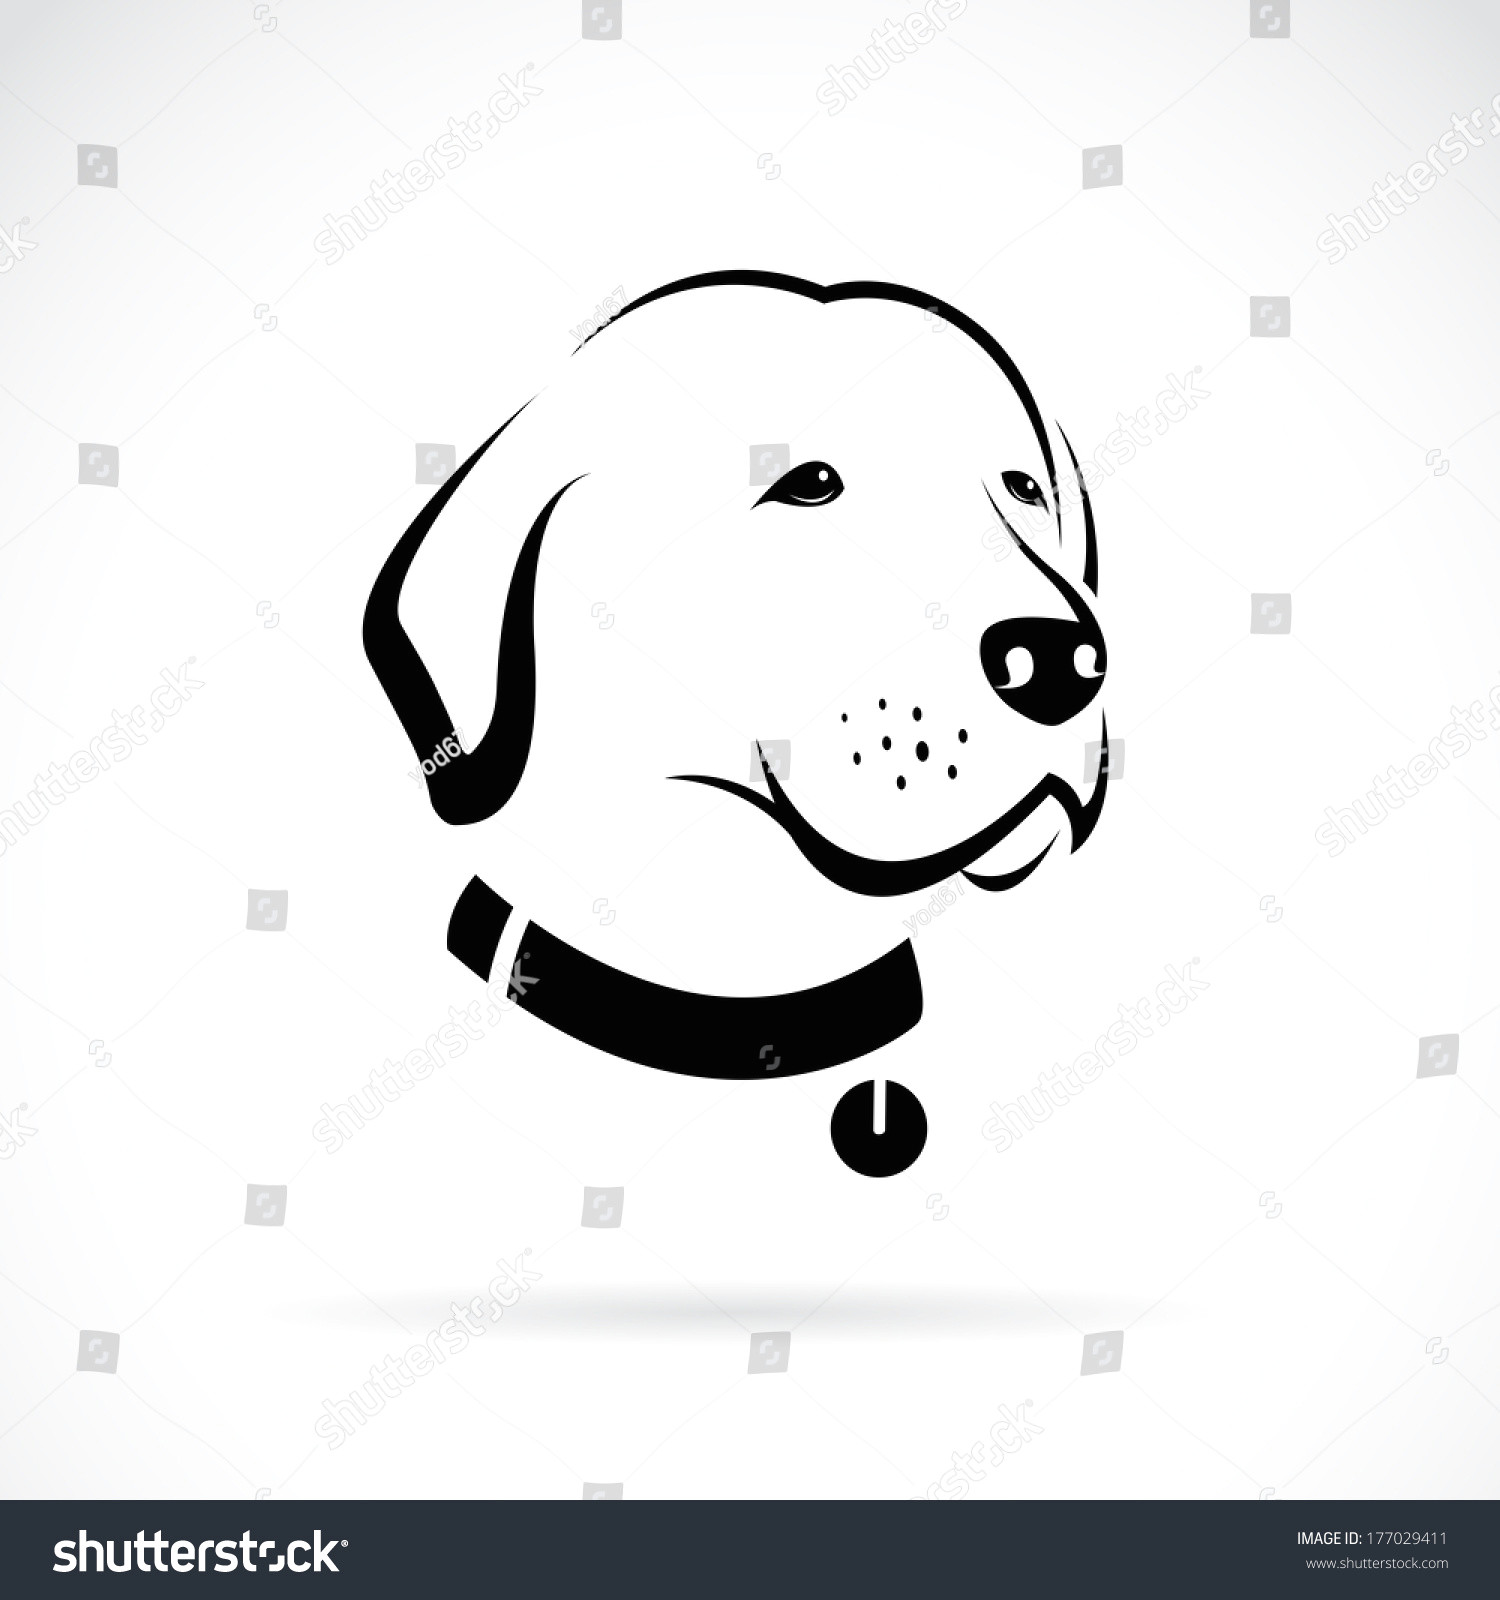 vector image of an labrador dog s head on white background